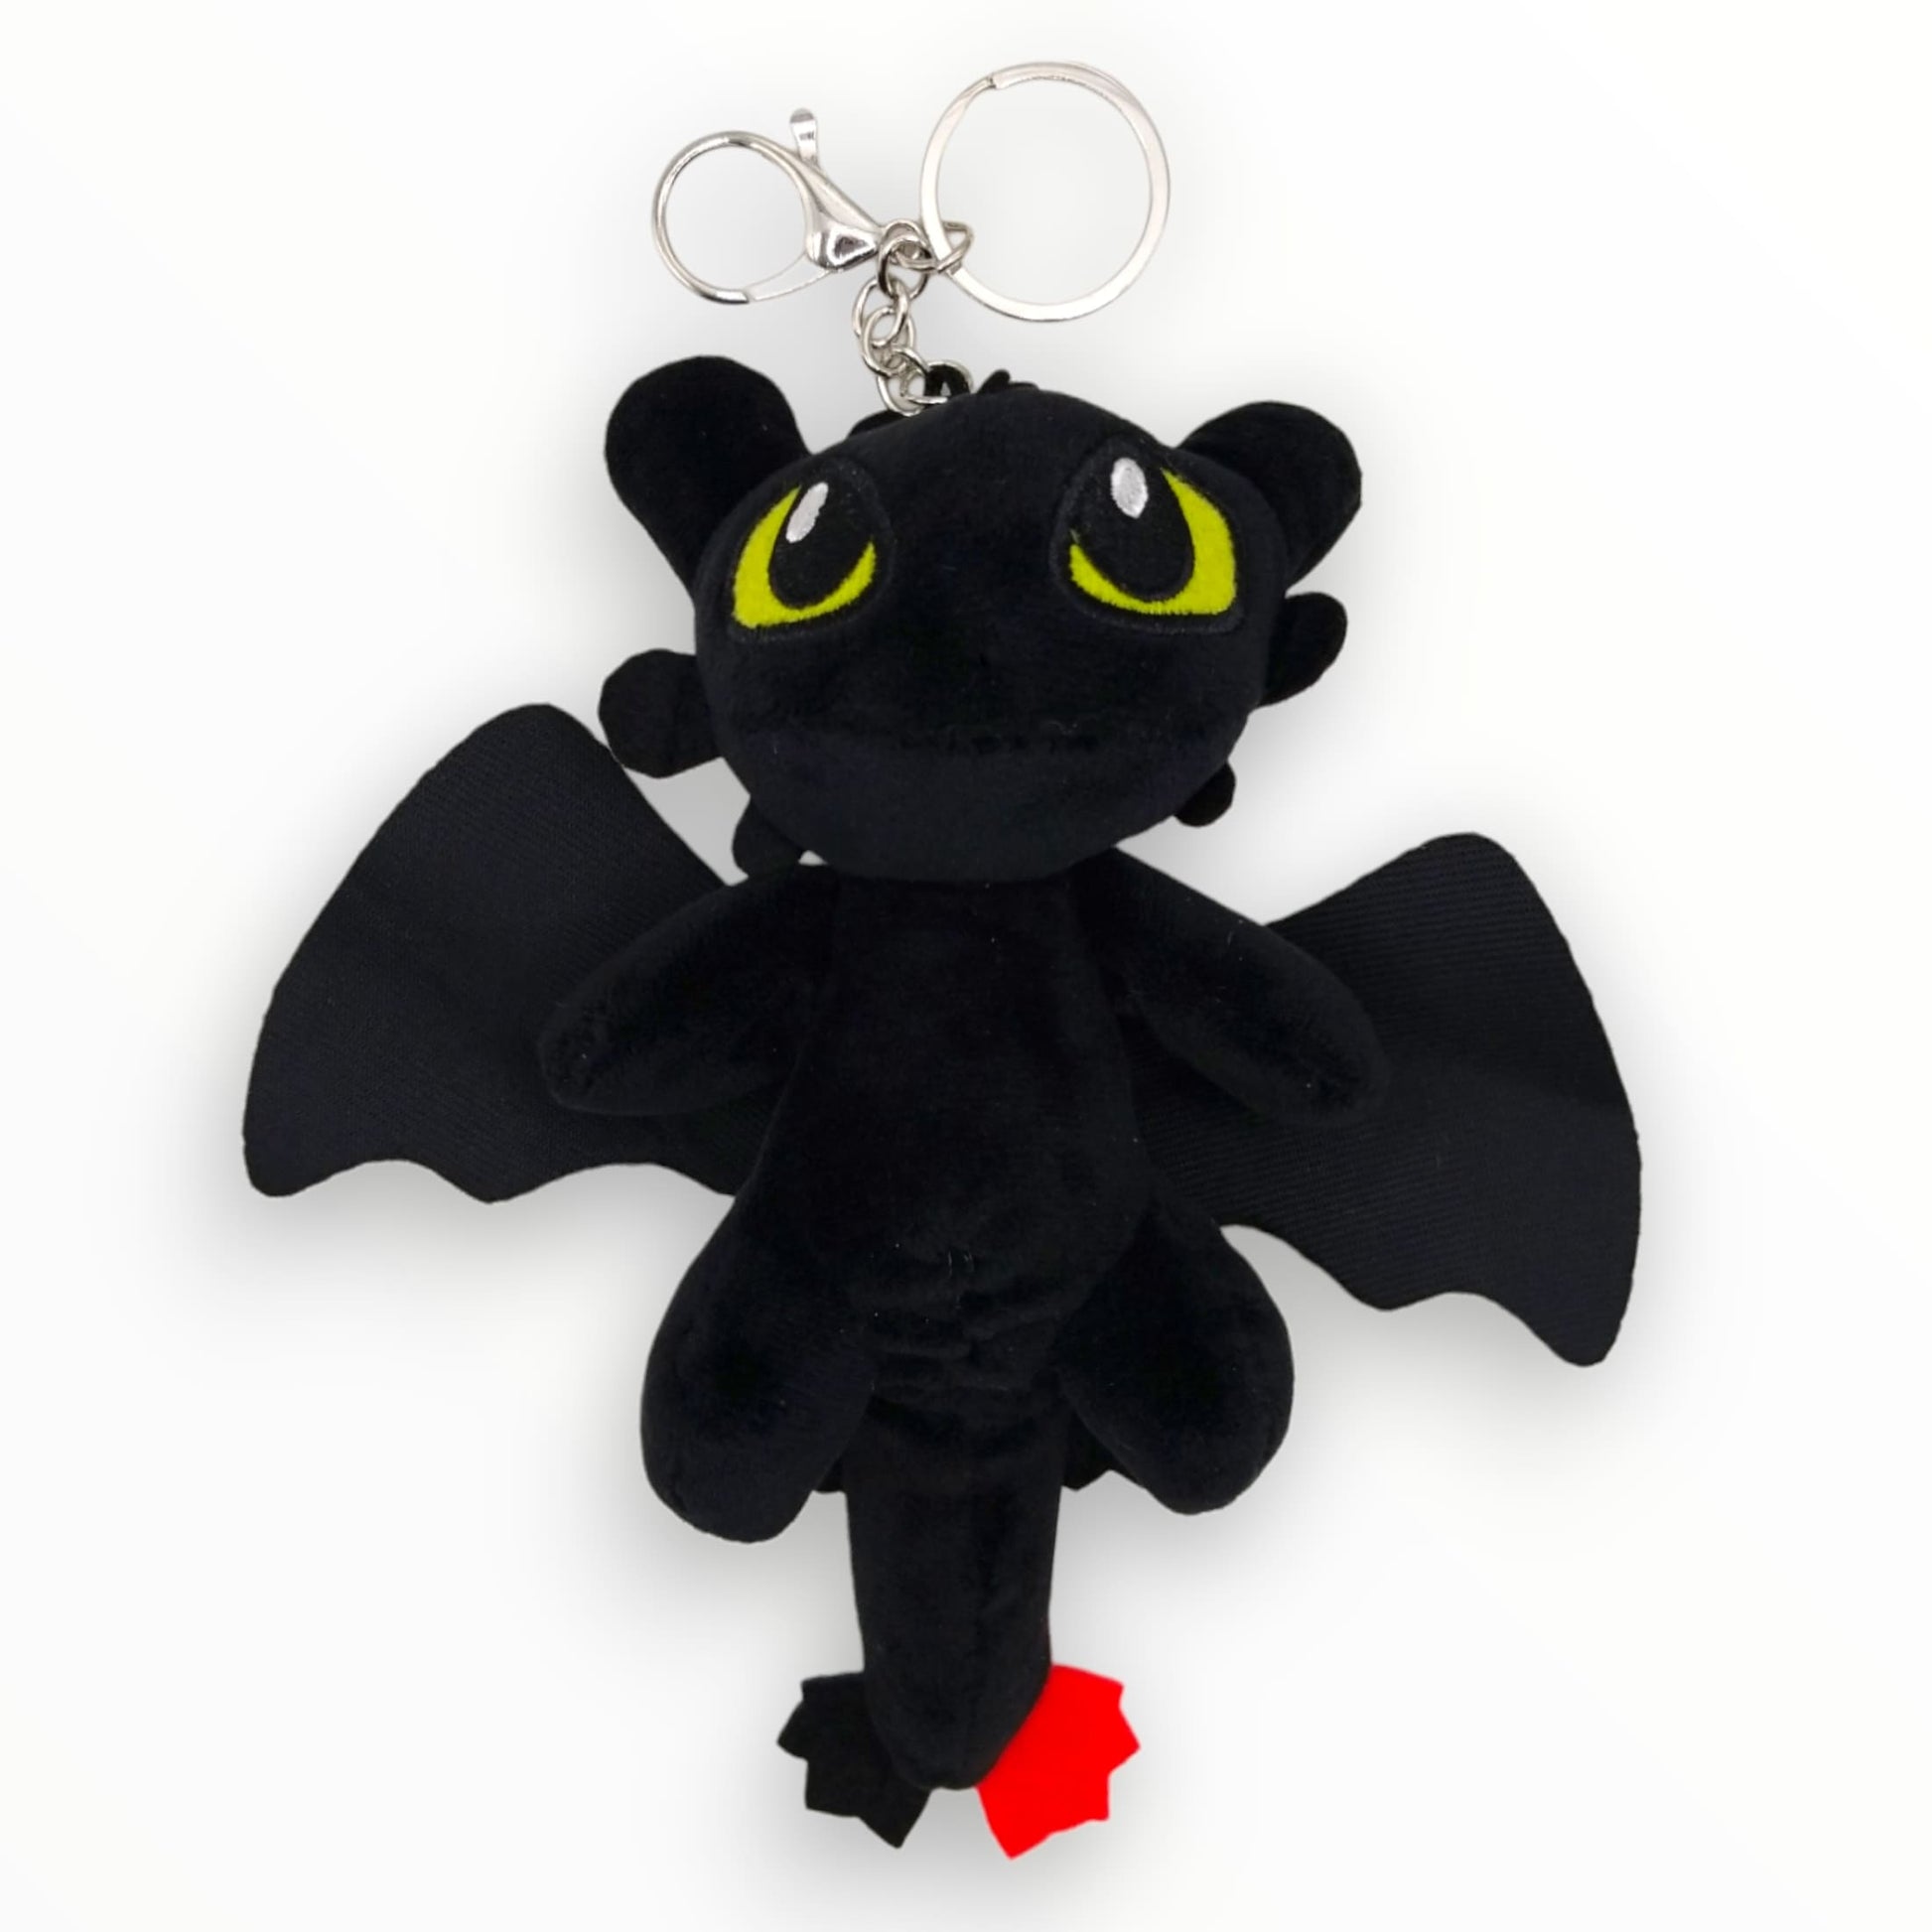 Toothless Dragon Mini Plush Keychain from Confetti Kitty, Only 14.99